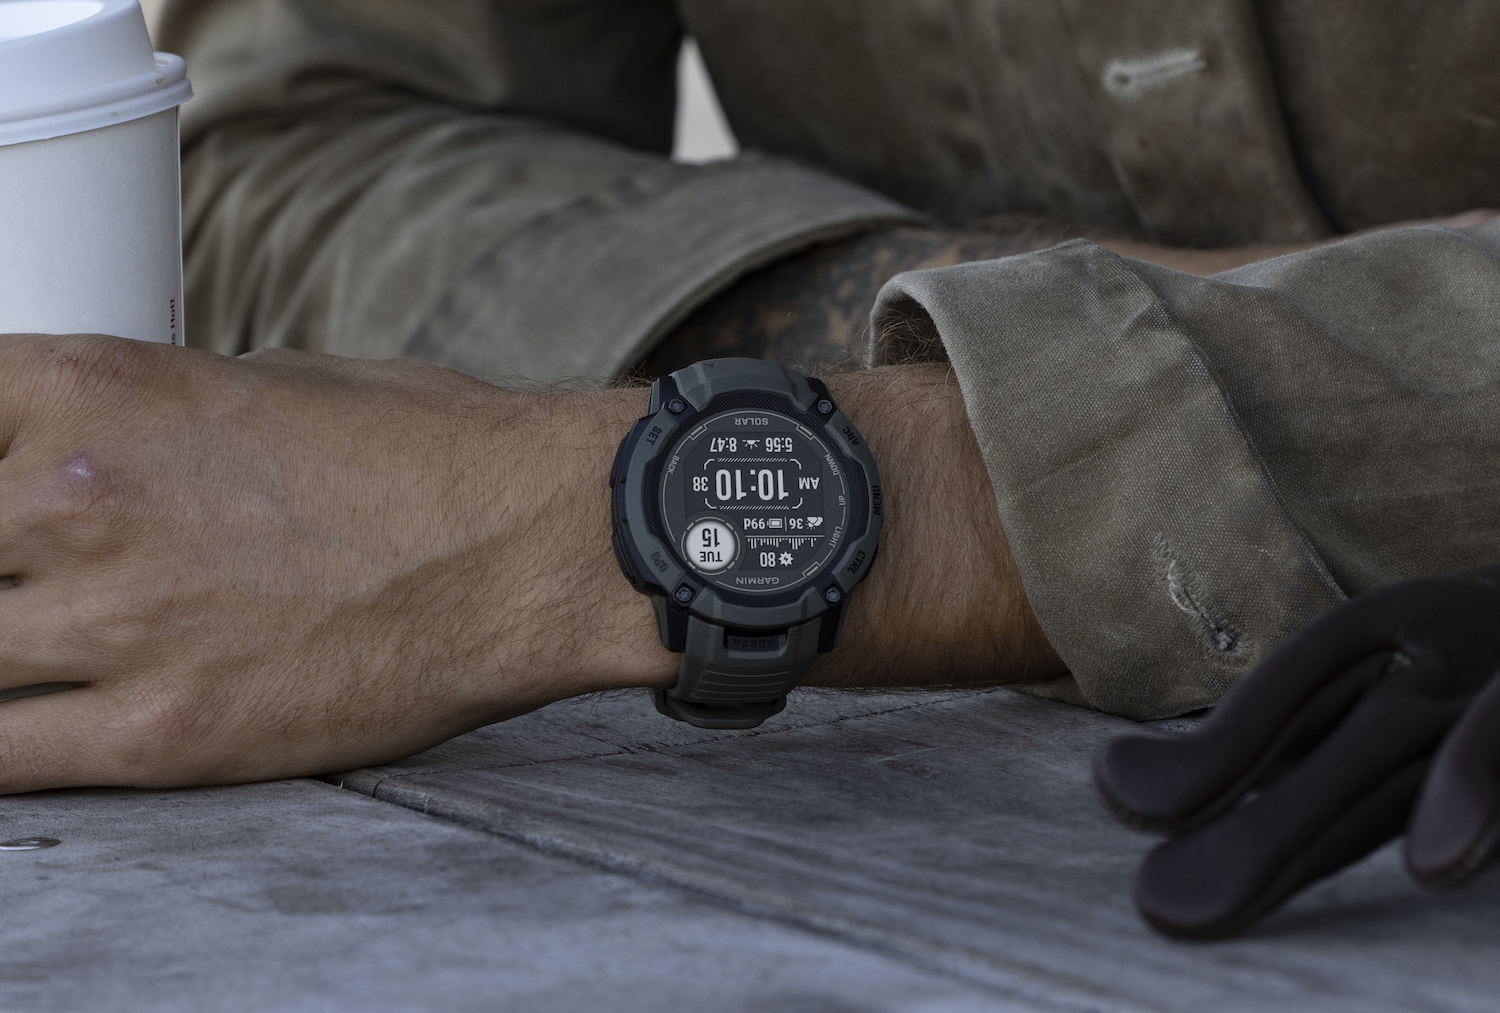 Garmin Instinct 2X SOLAR : The Smartwatch that Never needs a charge! 